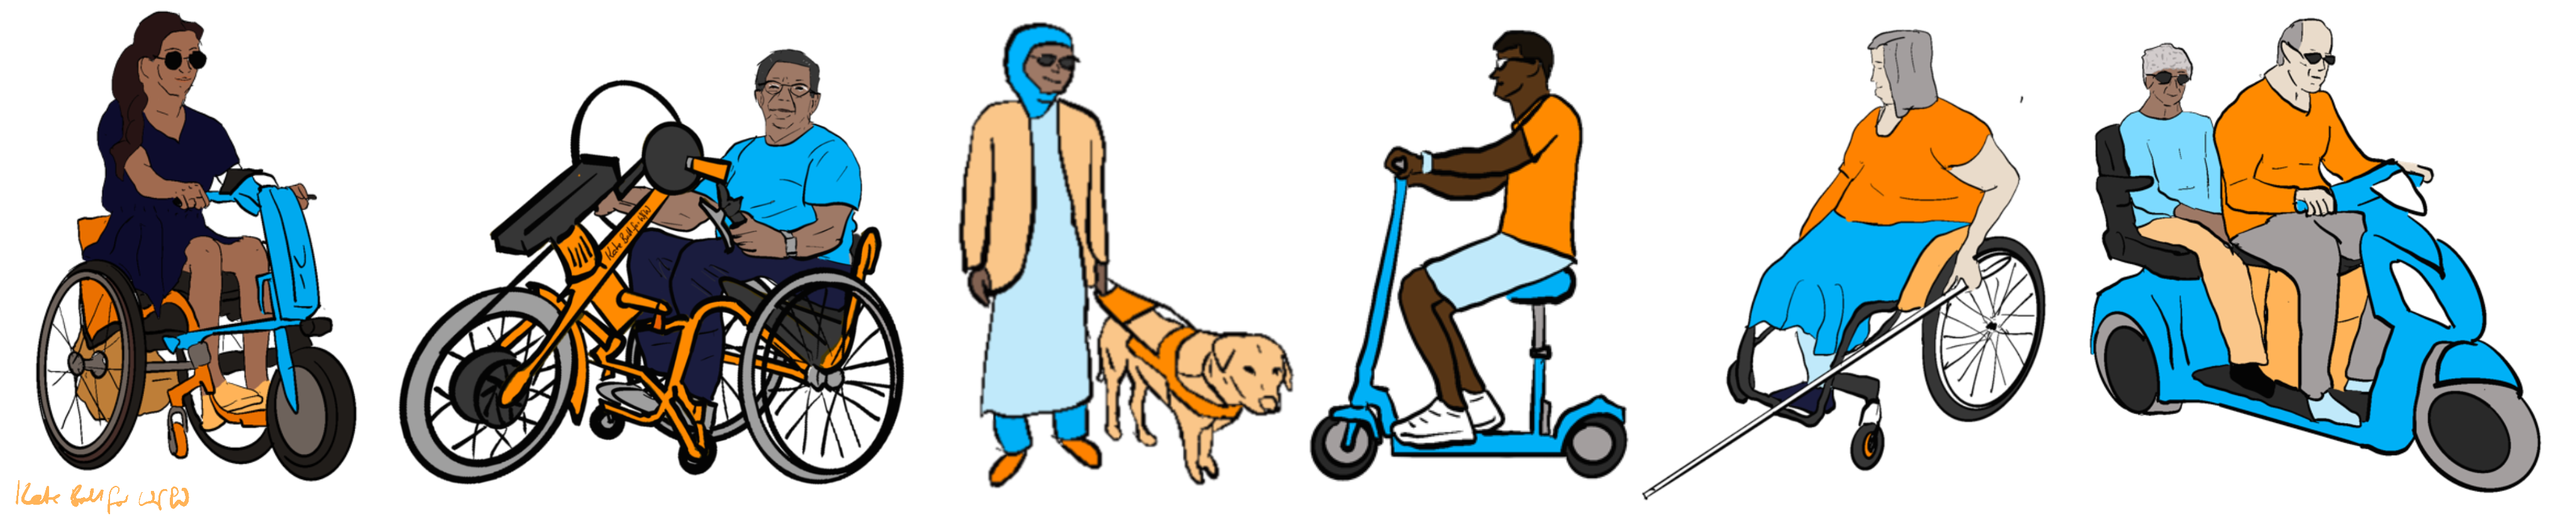 SSix e-powered active travel options for Disabled people. From left to right, a person using an e-attachment on a manual wheelchair, a person using a clip-on e-assist handcycle with a manual wheelchair, a person walking with a guide dog, a person sitting on a 2-wheeled e-scooter, a person using a manual wheelchair and long cane, two people sitting on a tandem mobility scooter.